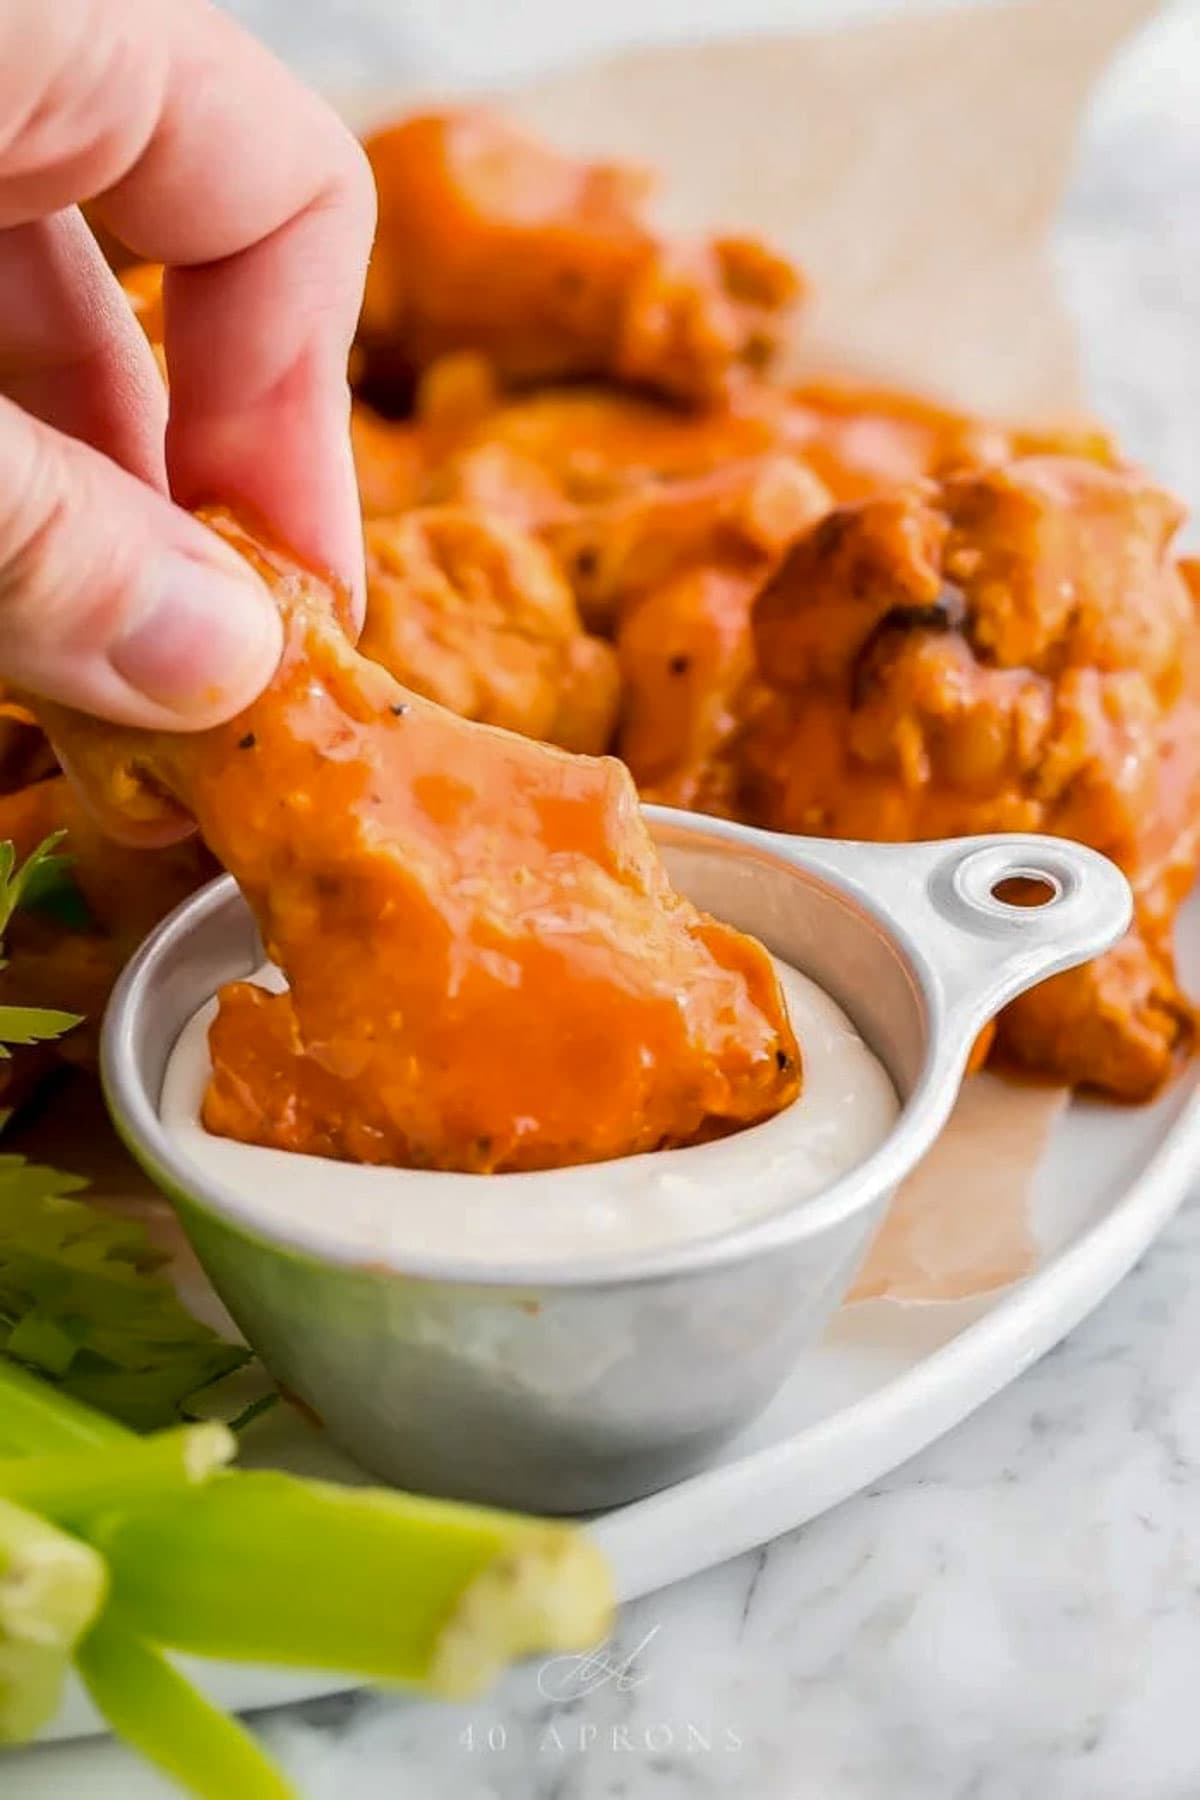 Bright orange buffalo-sauced chicken wings, cooked in the Crockpot, being dipped into a small bowl of ranch dressing.